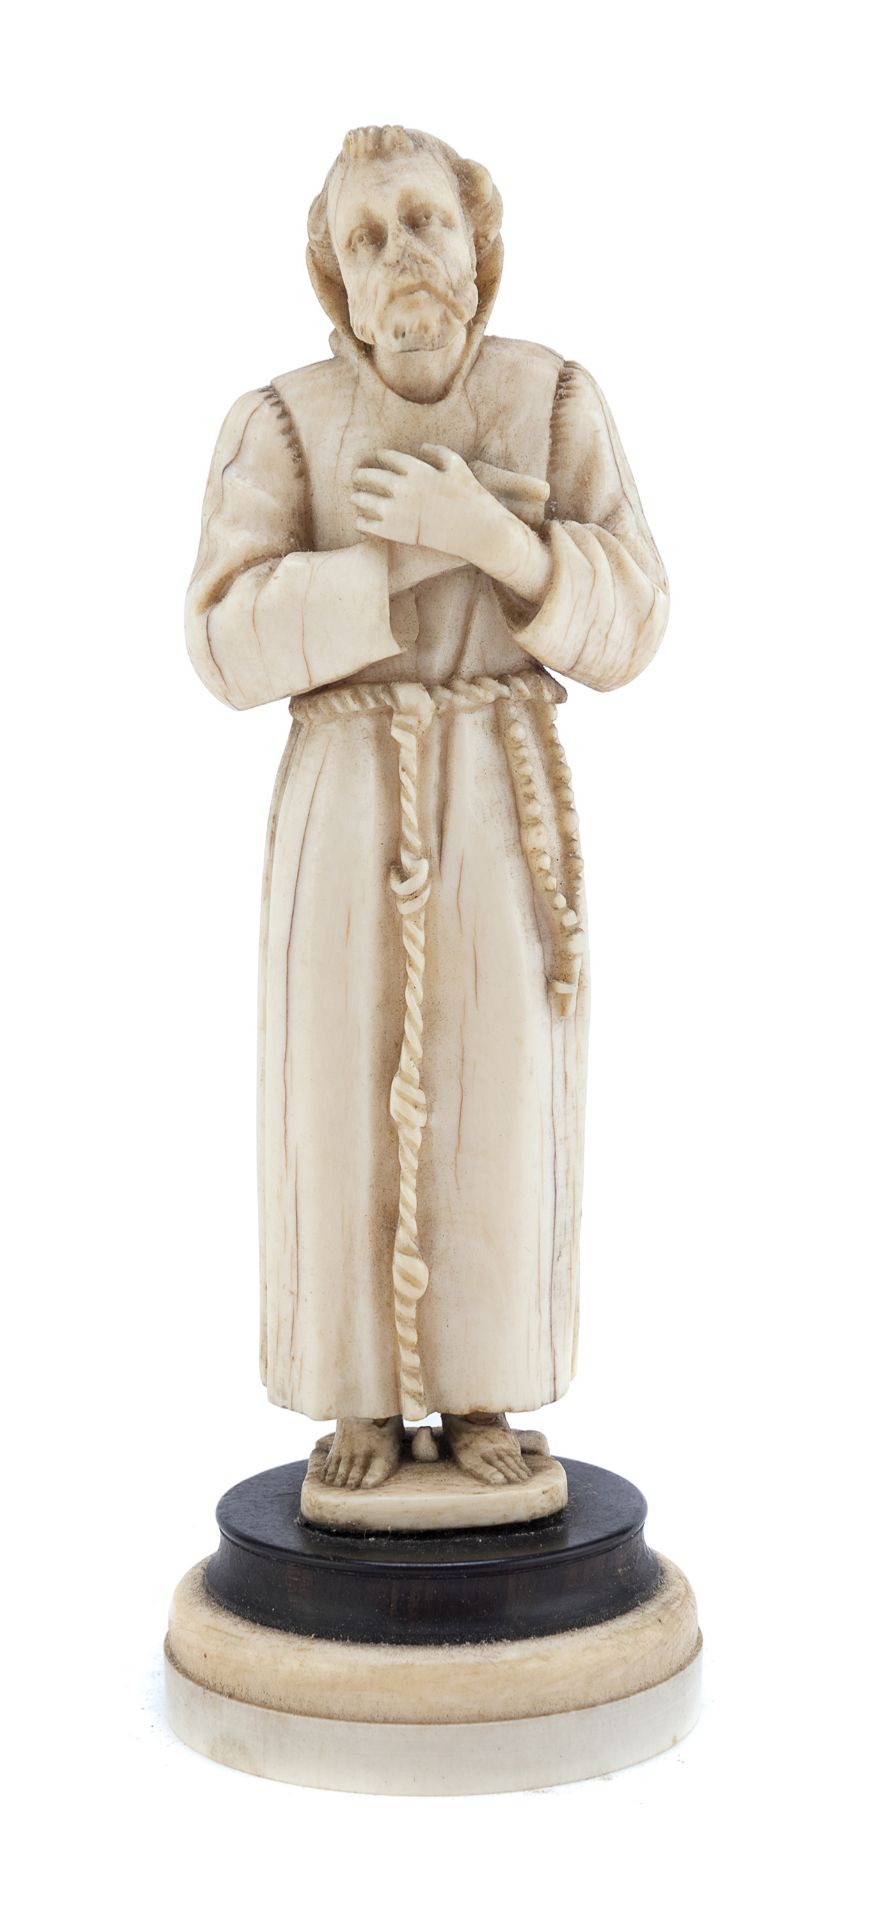 IVORY SCULPTURE OF ST FRANCIS 18TH CENTURY